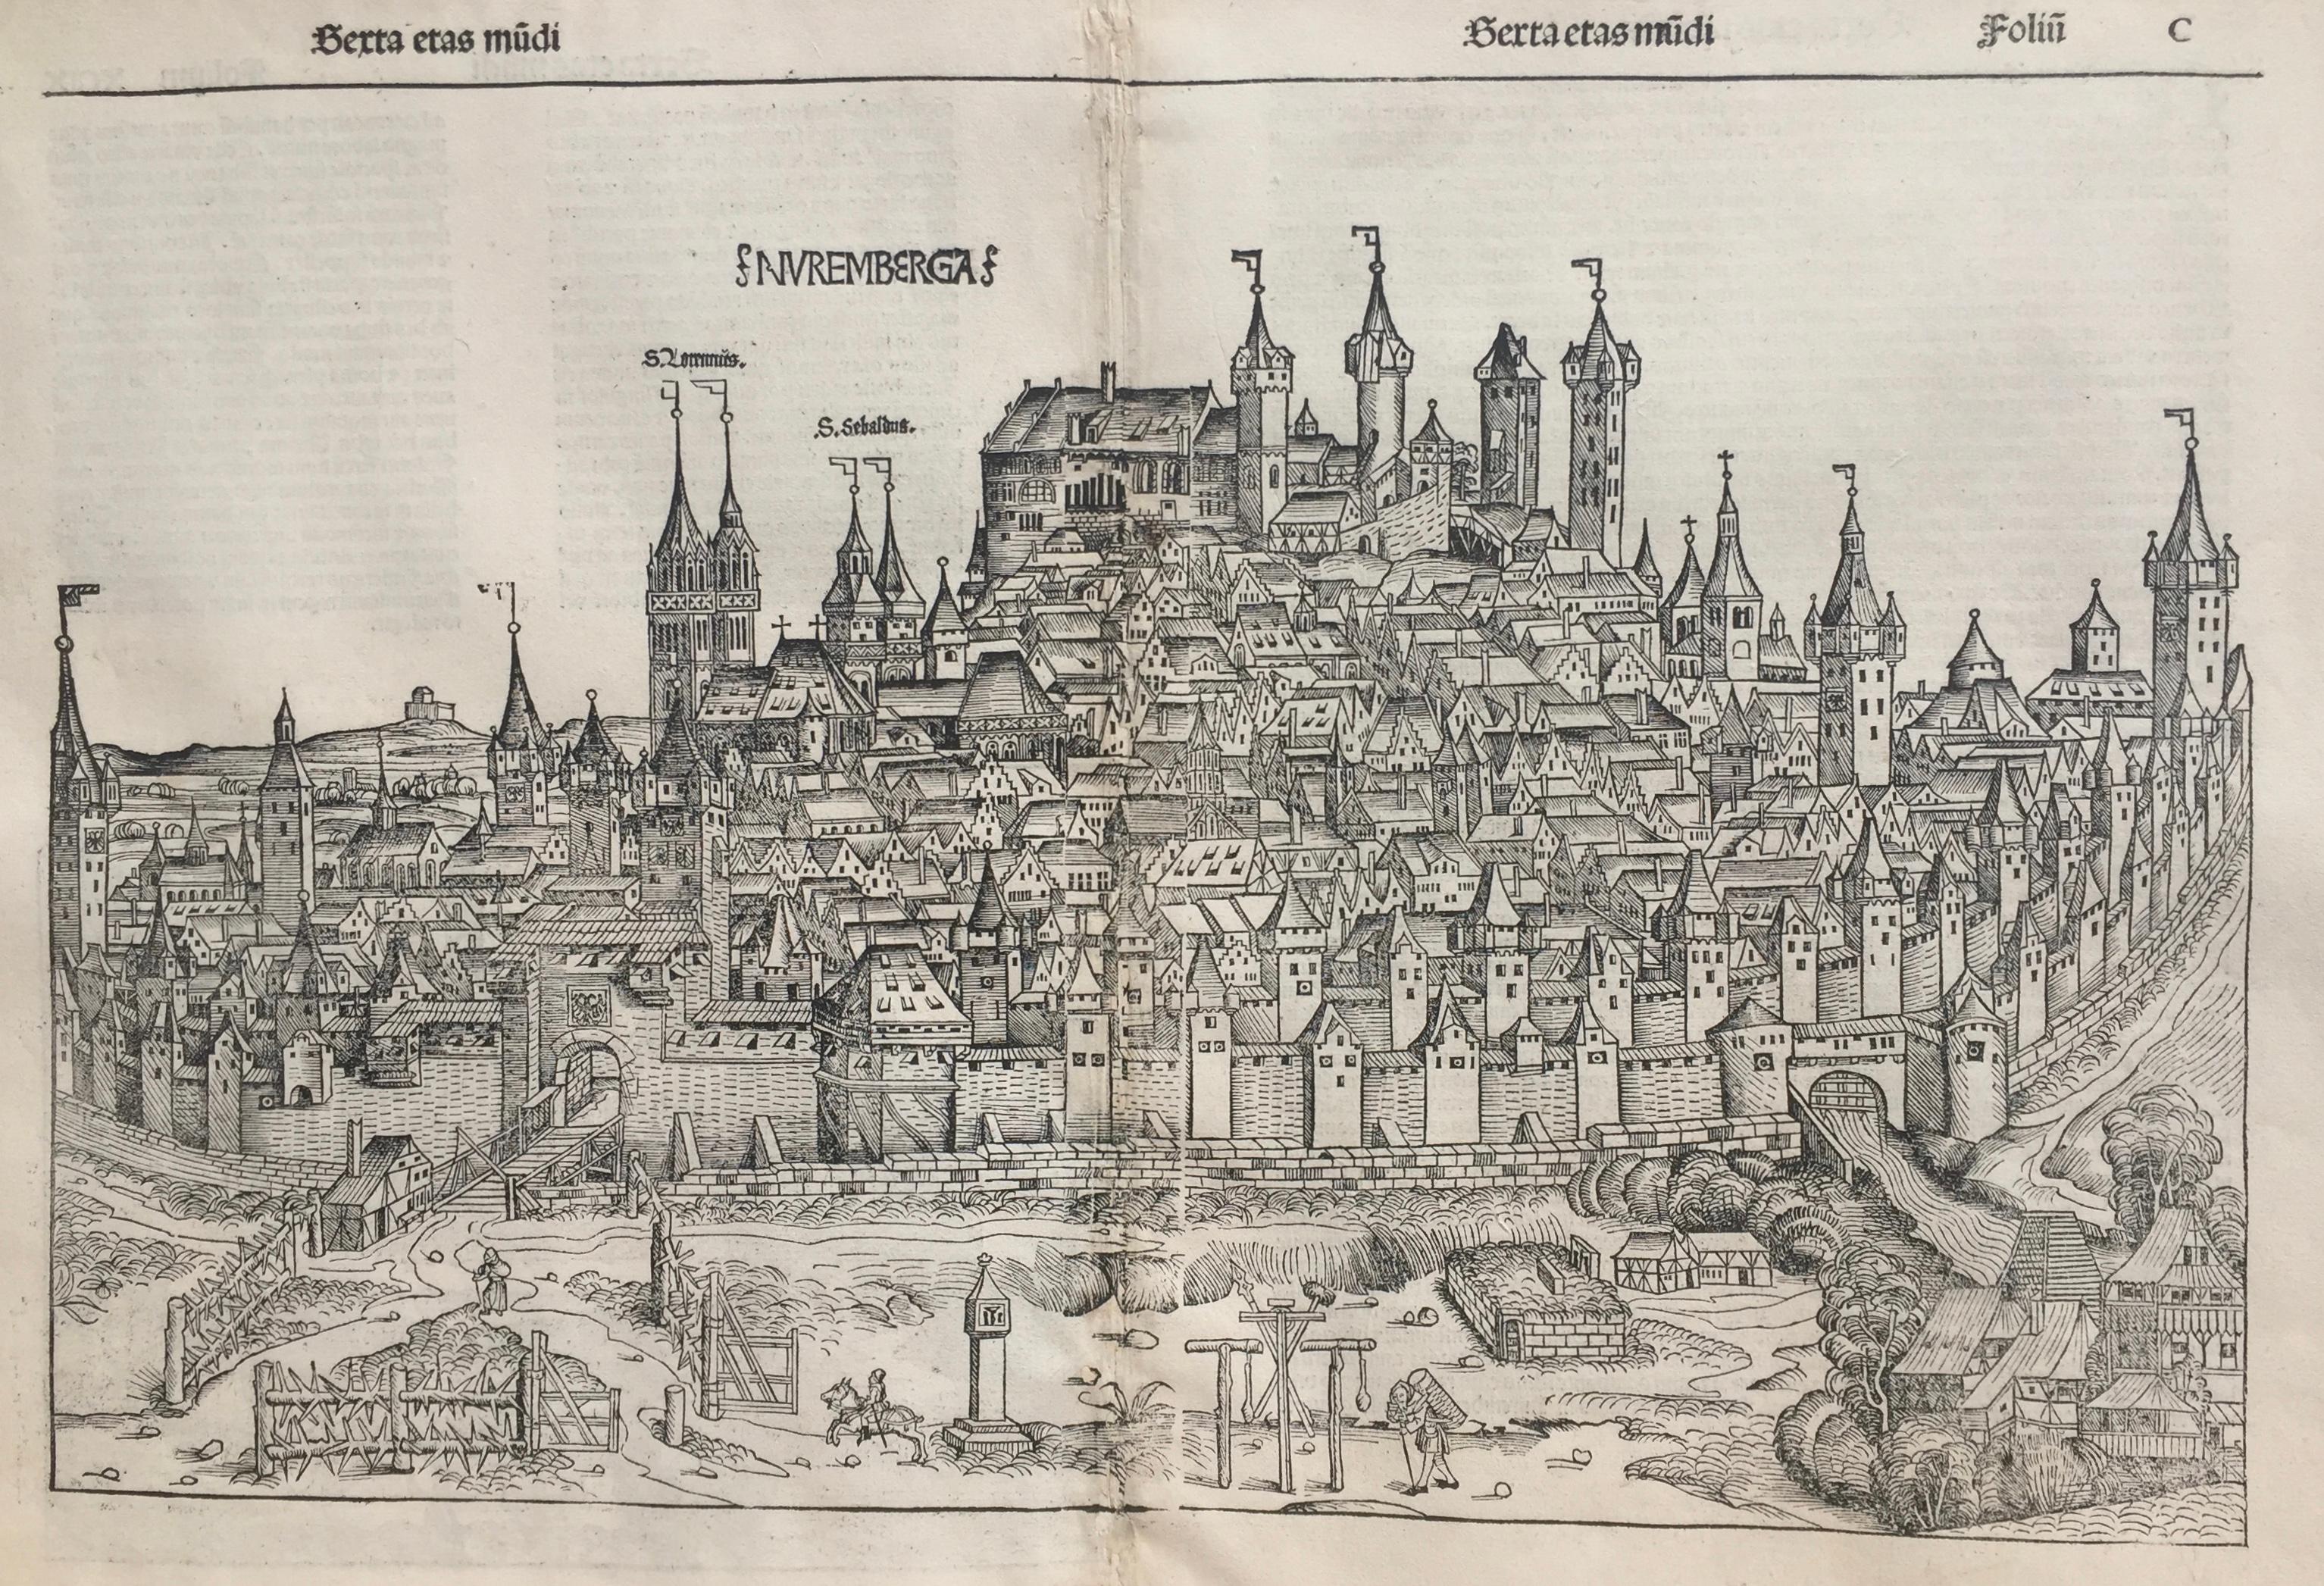 View of Nuremberg from Nuremberg Chronicle - 527 years old - Print by Unknown